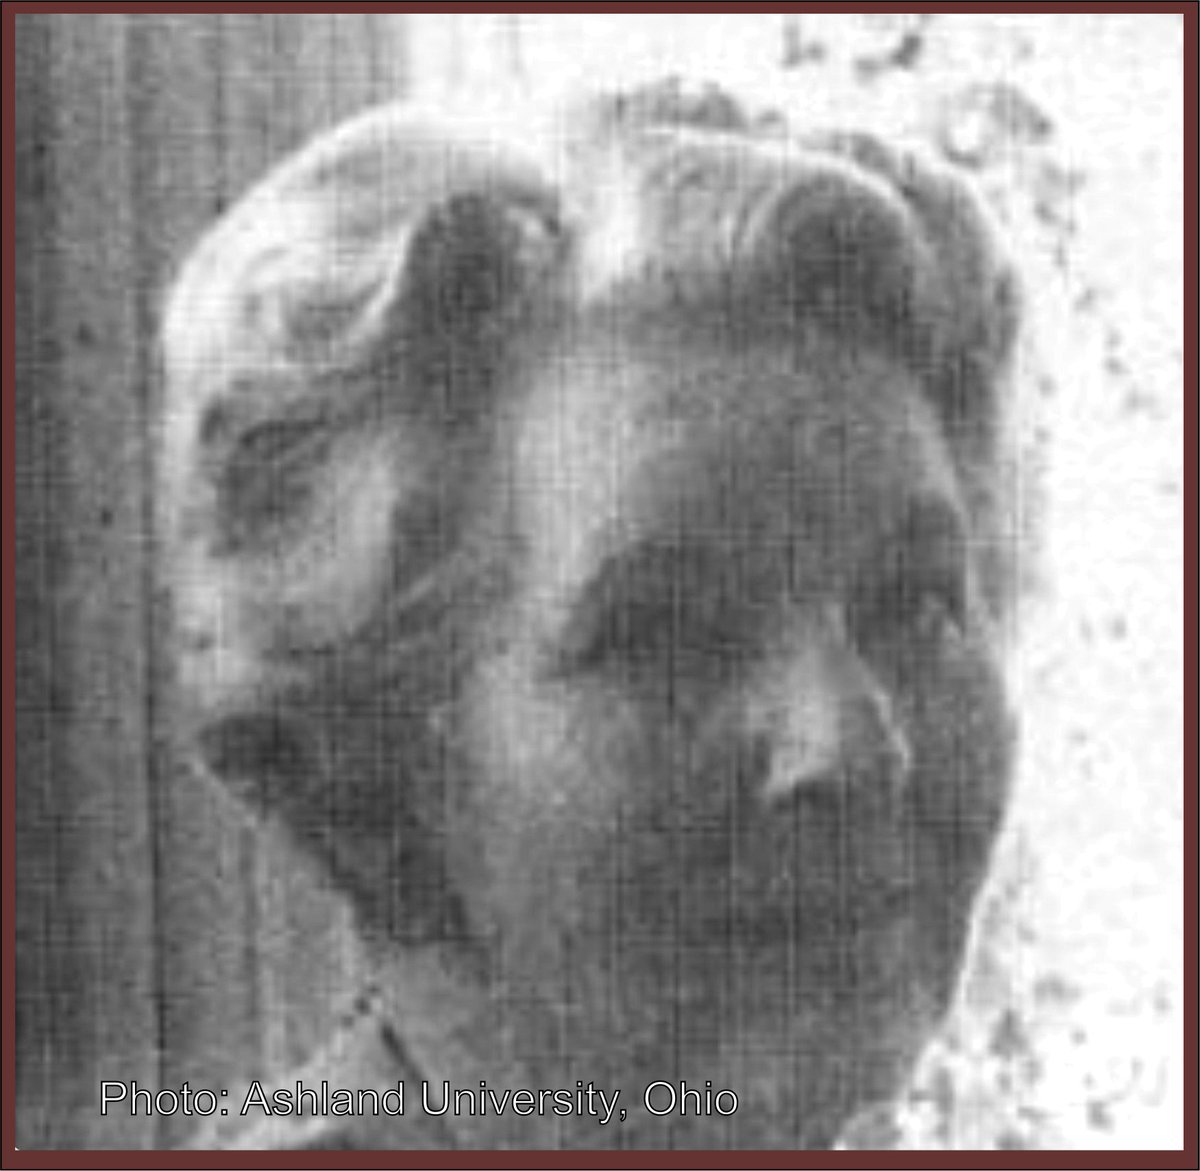 Born 4th April 1906 in Ohio, Eunice Lea Kettering began composing as a child and later studied at Oberlin Conservatory and with Bartók. She created many works and had over 20000 copies published. She was the first woman to gain Fellowship of the American Guild of Organists.